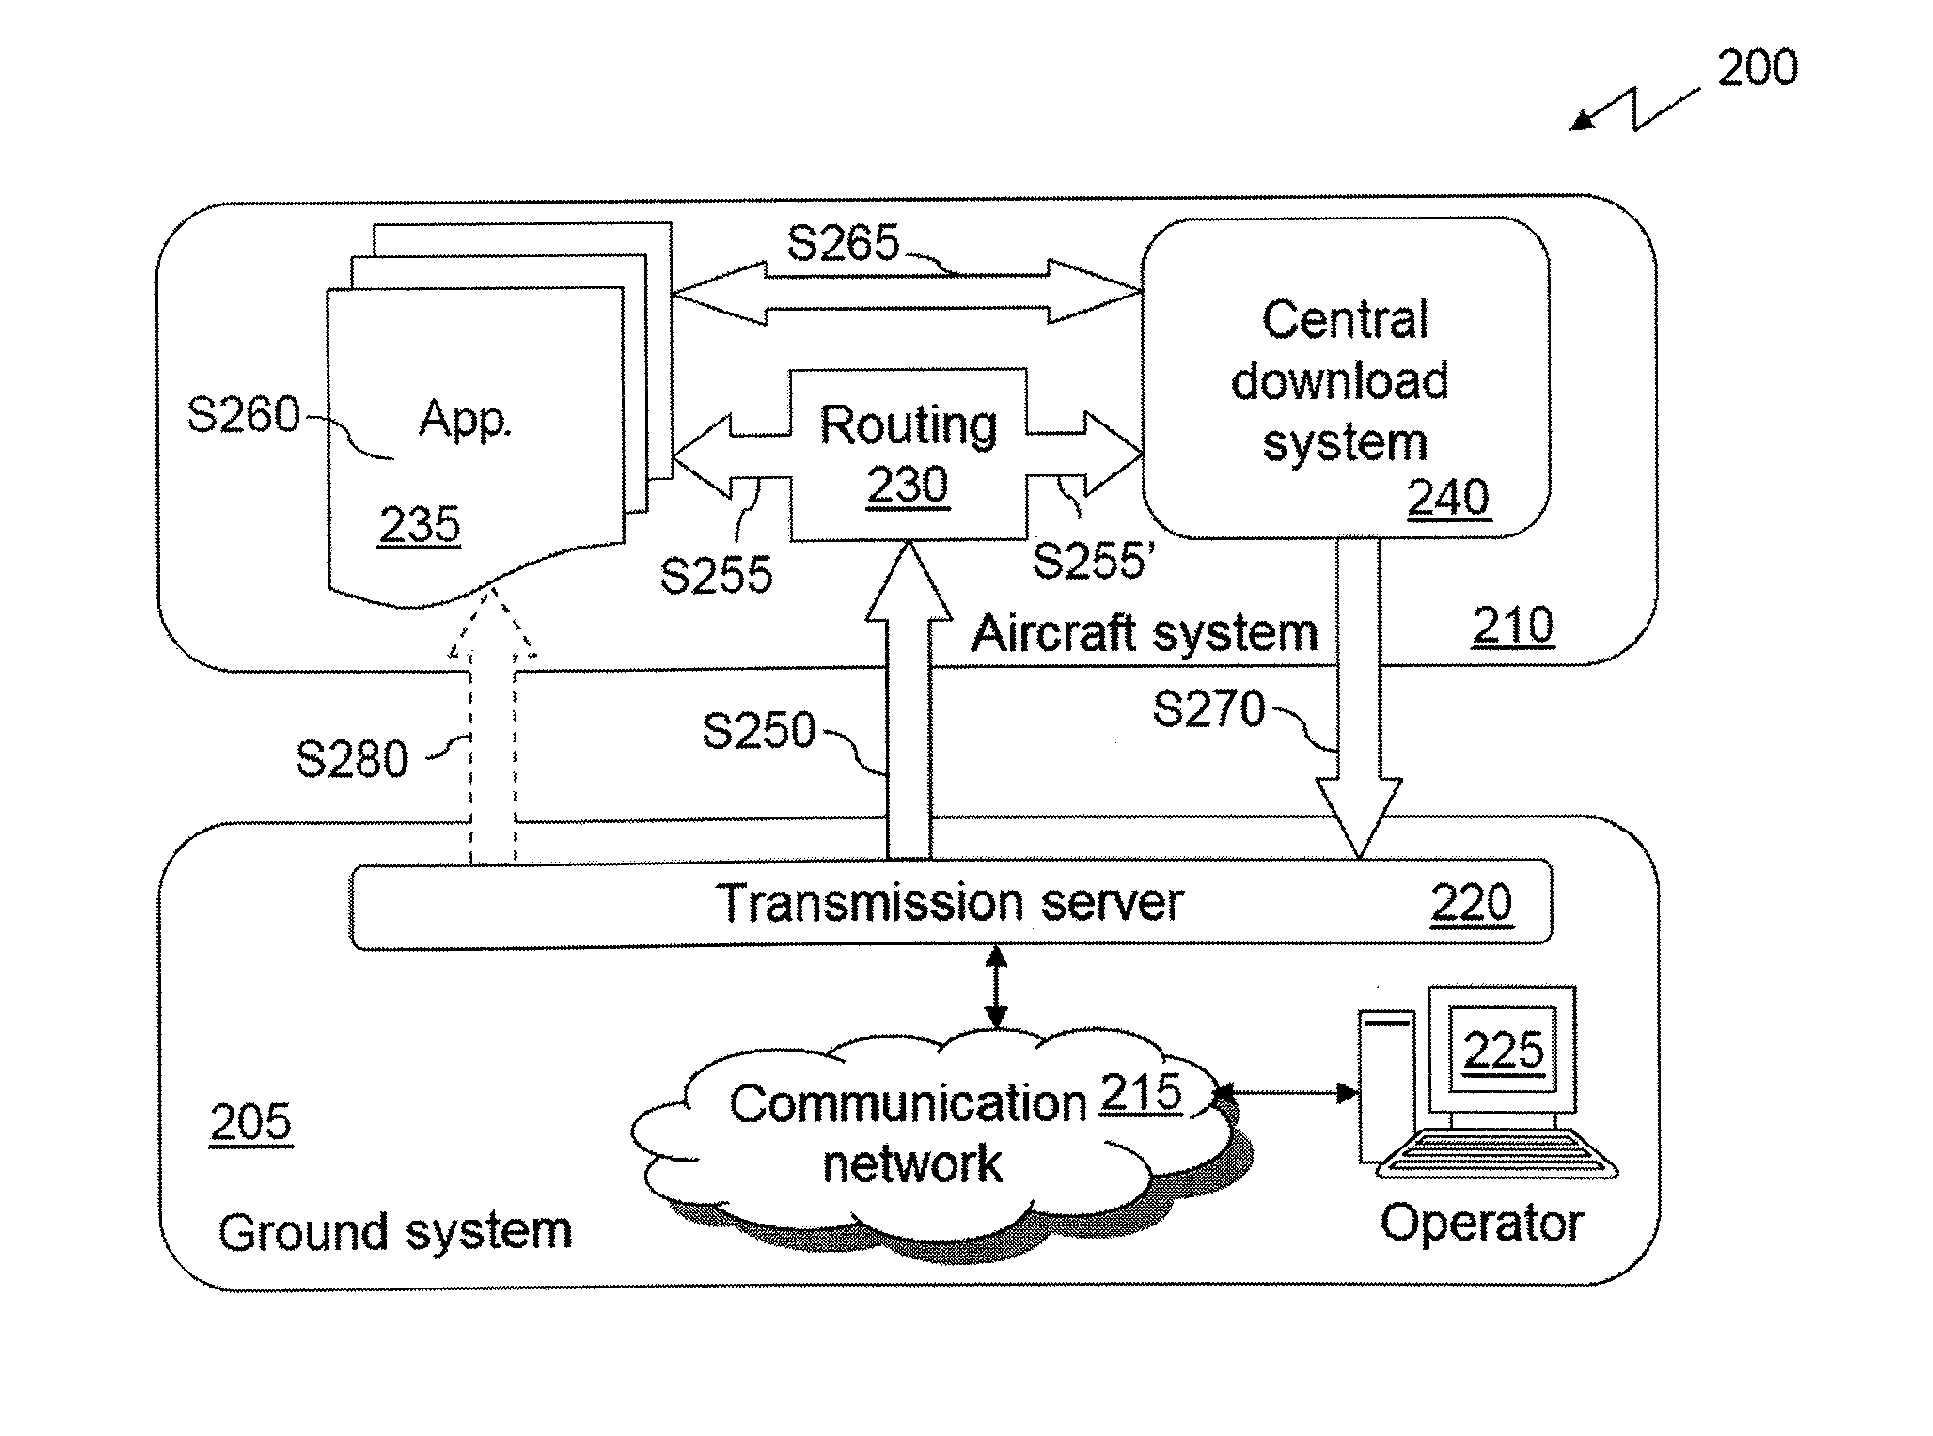 Method and device for optimizing data updates in operationally approved software applications of aircraft